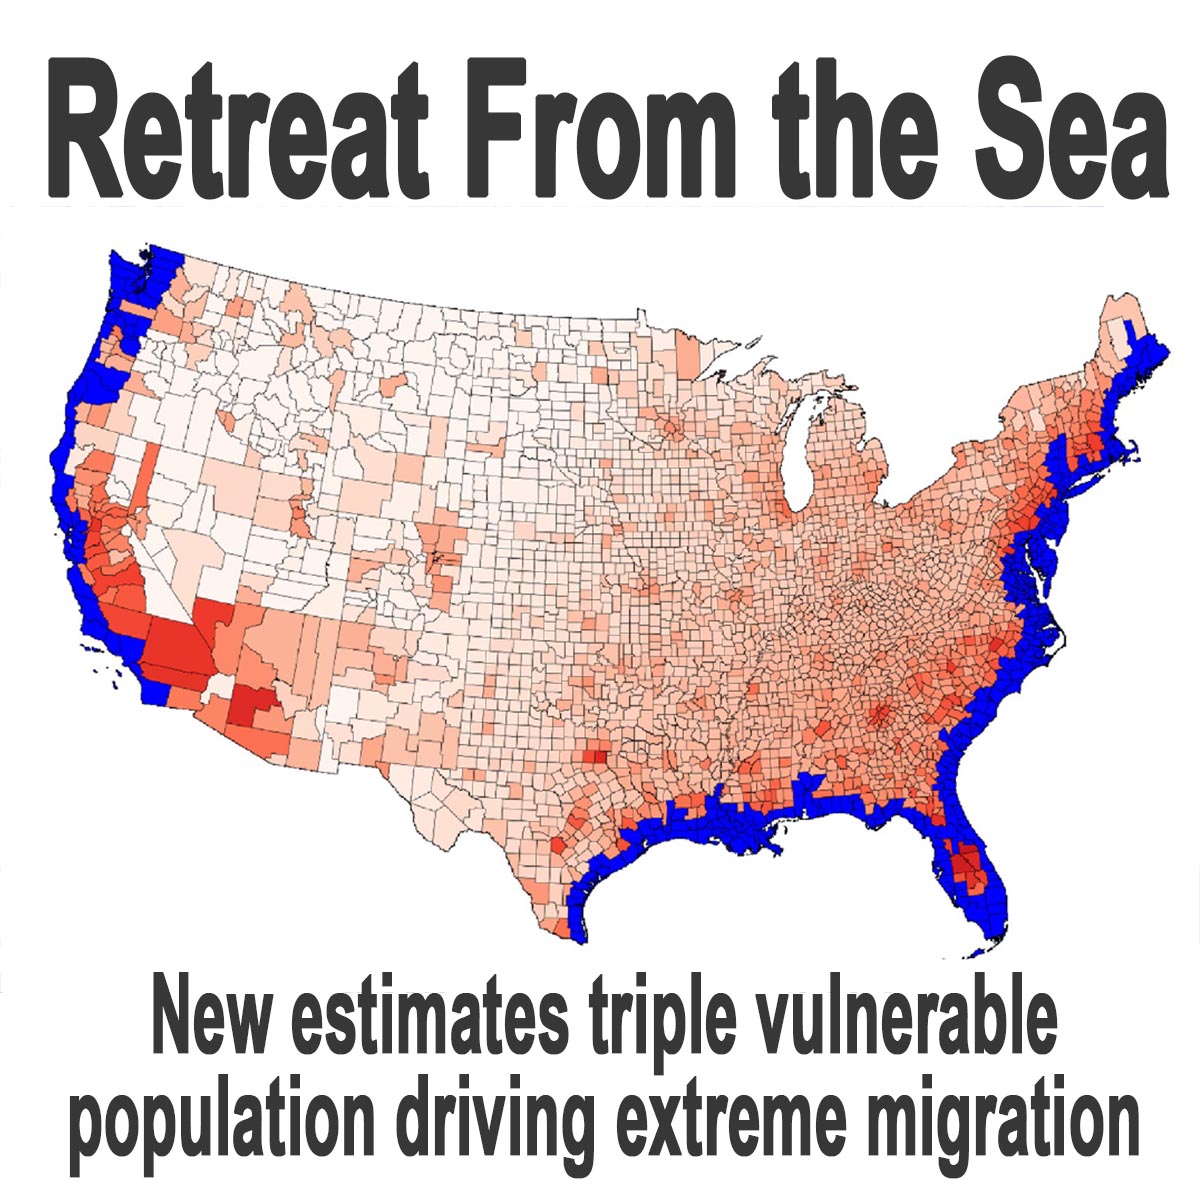 Retreat From the Sea: New estimates triple vulnerable population driving extreme migration